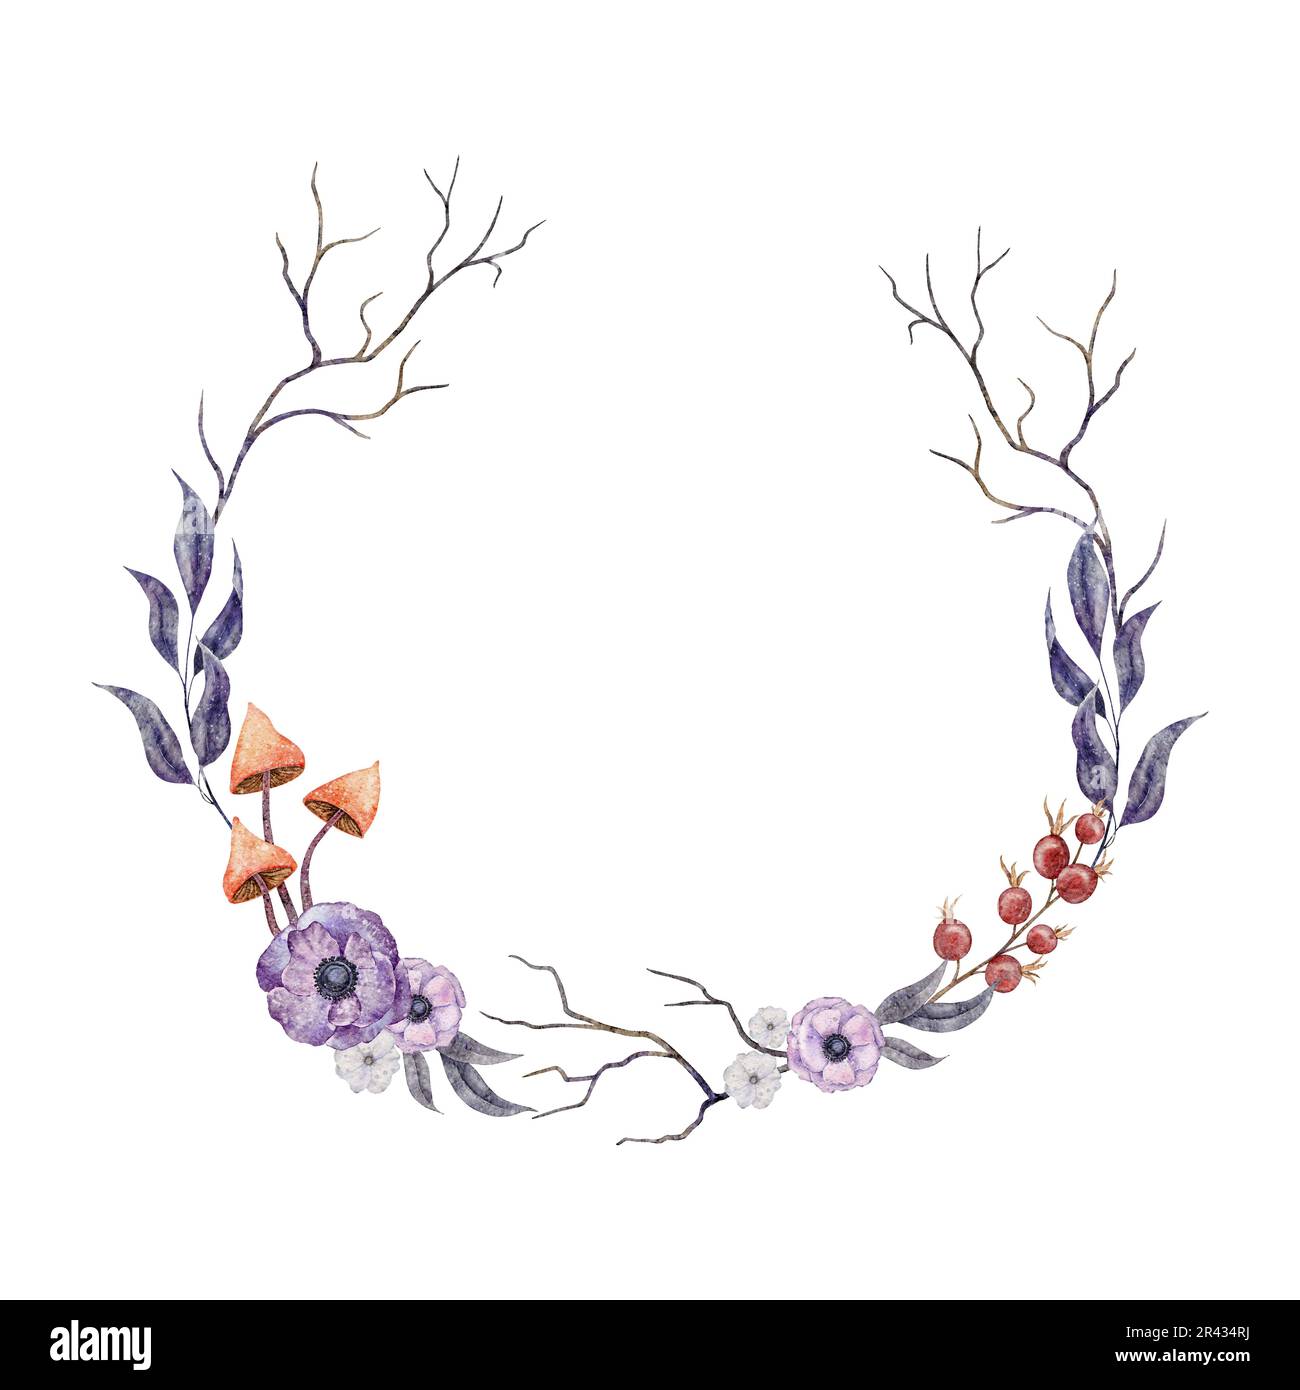 Round wreath with purple anemone , rosehip berries, dusk violet leaves, mushroom and tree branches. Autumn hand drawn watercolor illustration. Fall Stock Photo